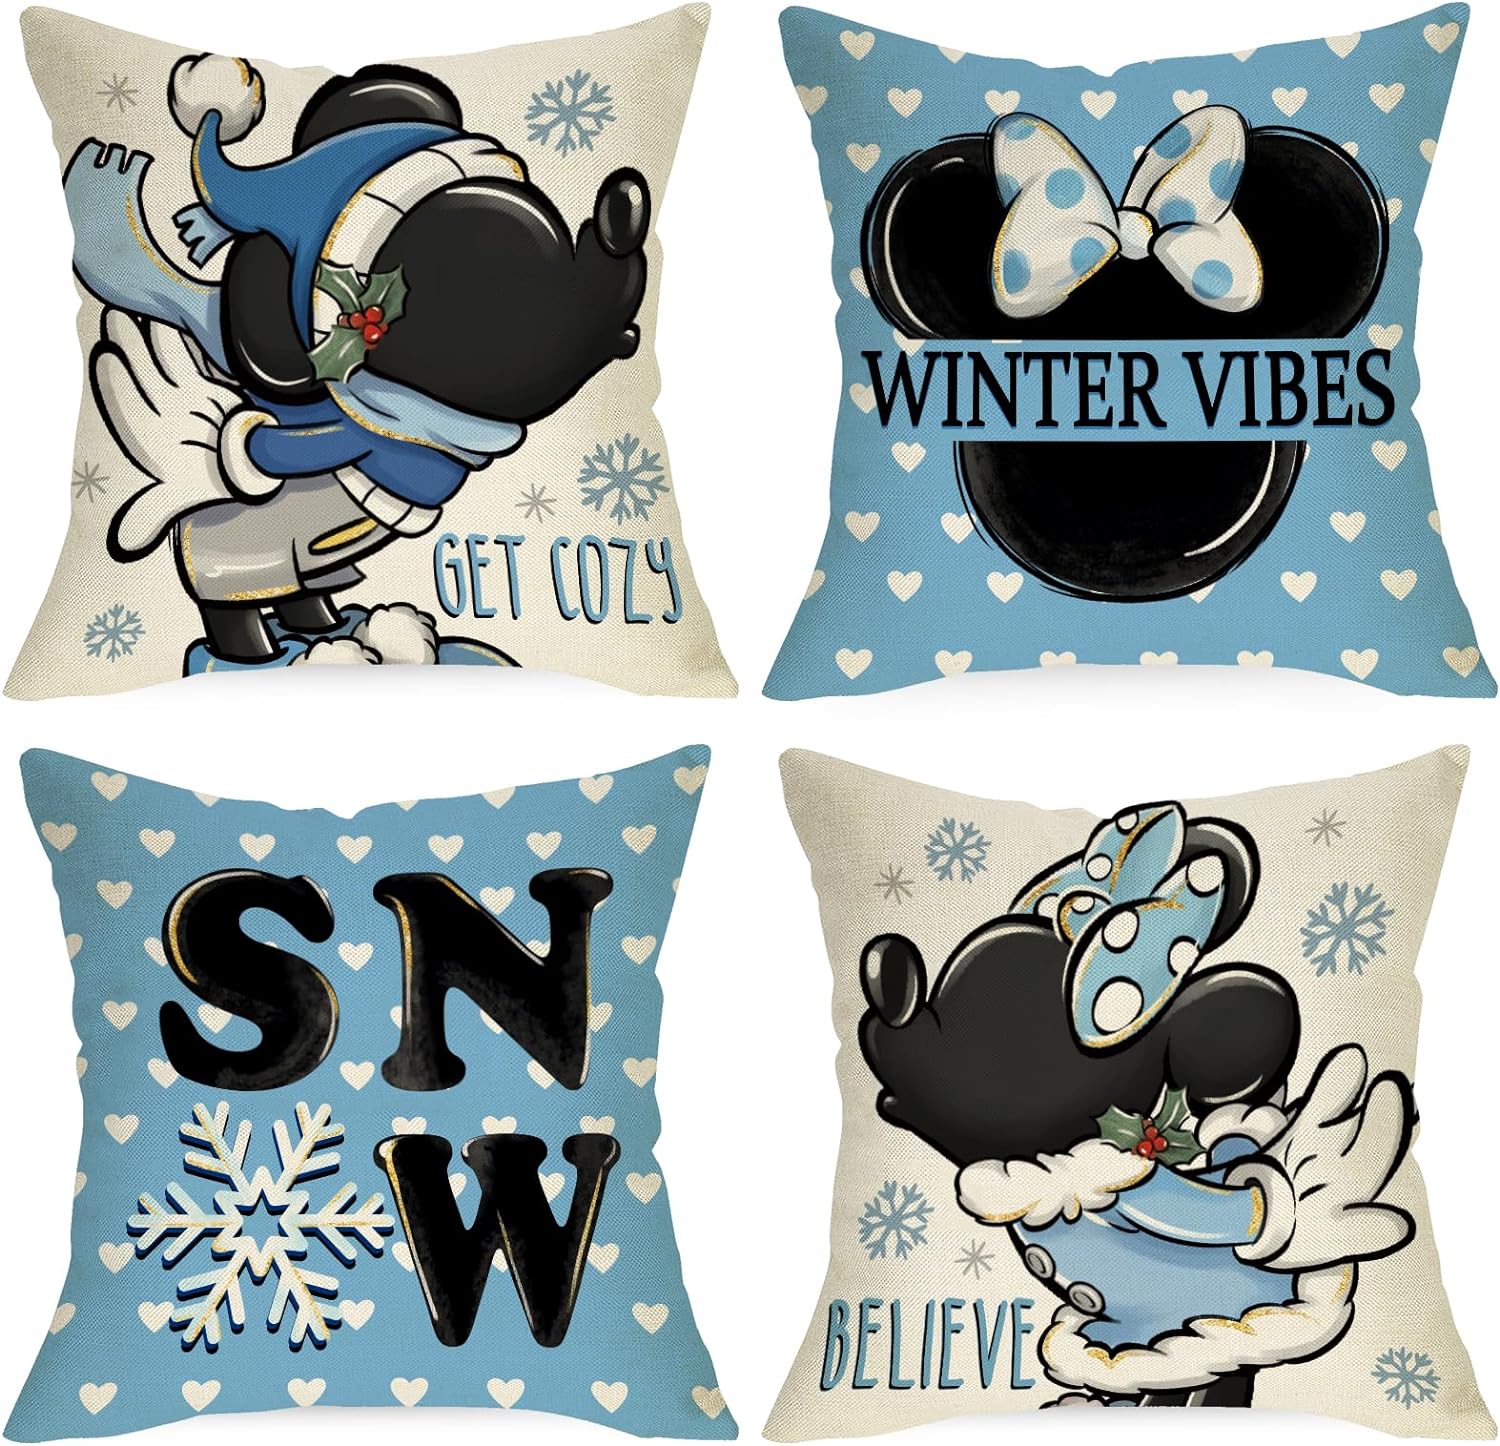 Winter Vibes Blue Decorative Throw Pillow Covers 18 x 18 Set of 4 Cartoon Mouse Love Heart Snow Get Cozy Believe Cushion Case Decor Seasonal Christmas Holiday Home Decoration for Sofa Couch